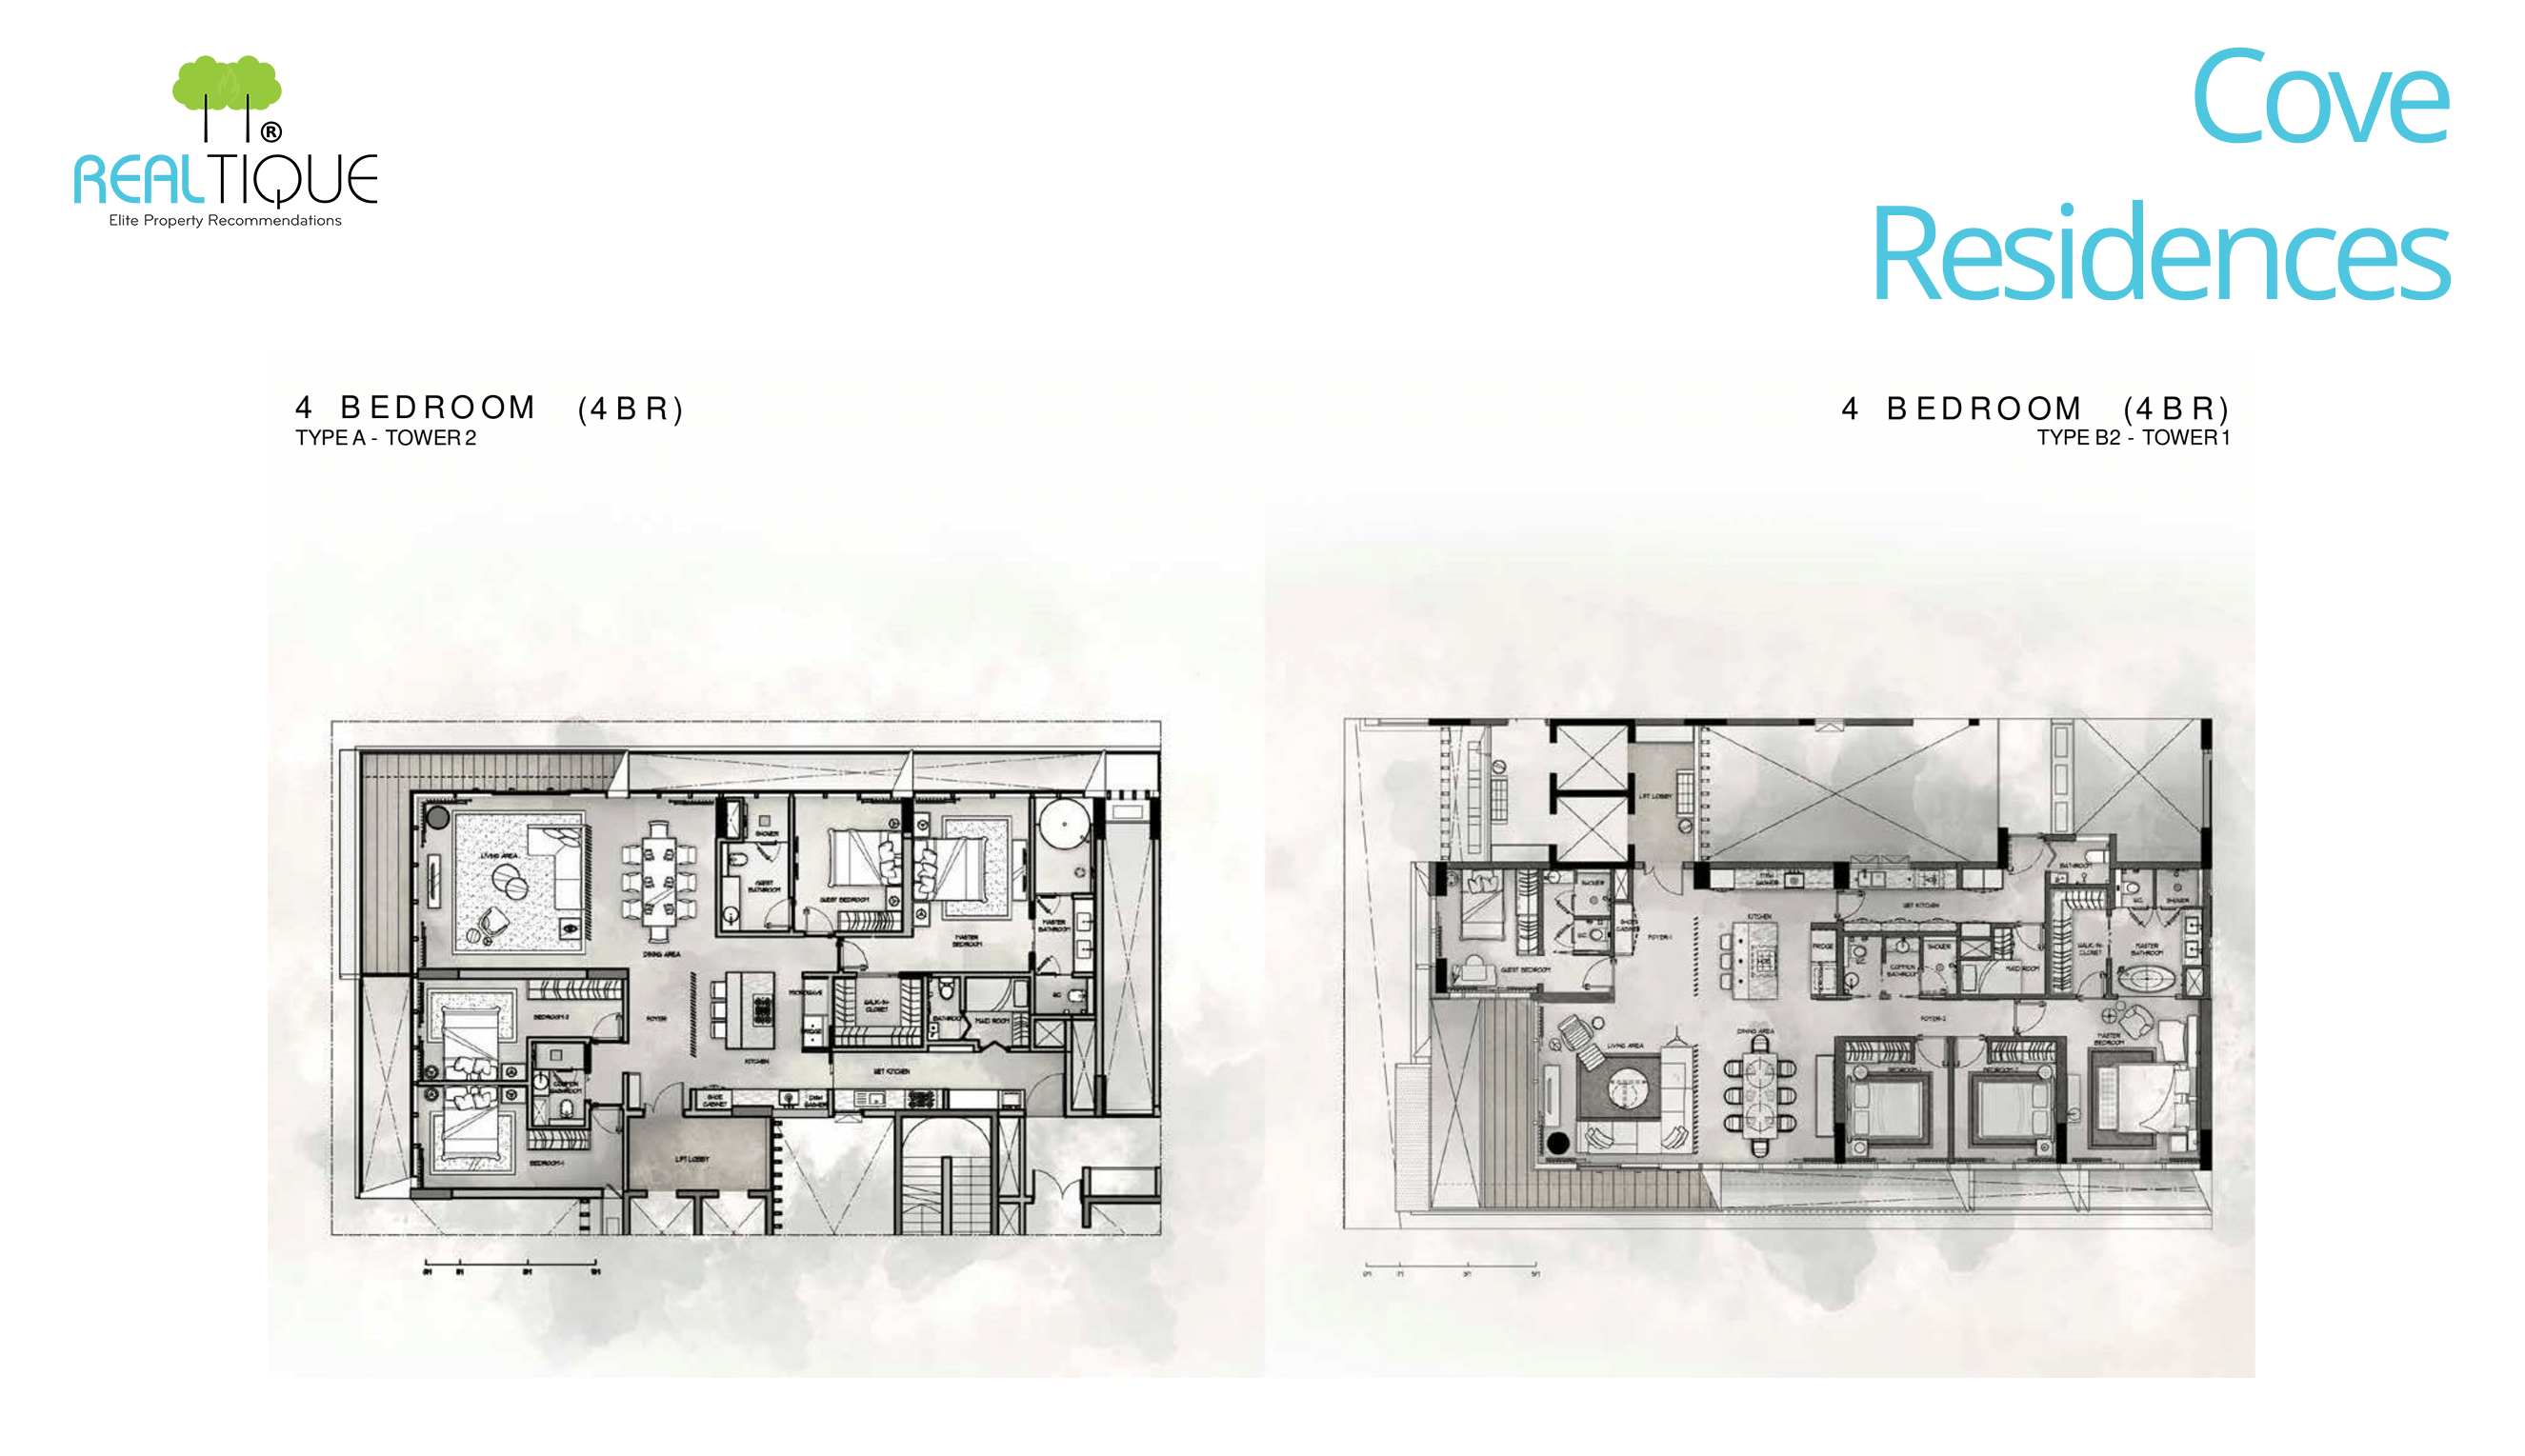 4 Bedroom Layout of Cove Residences (MU11)